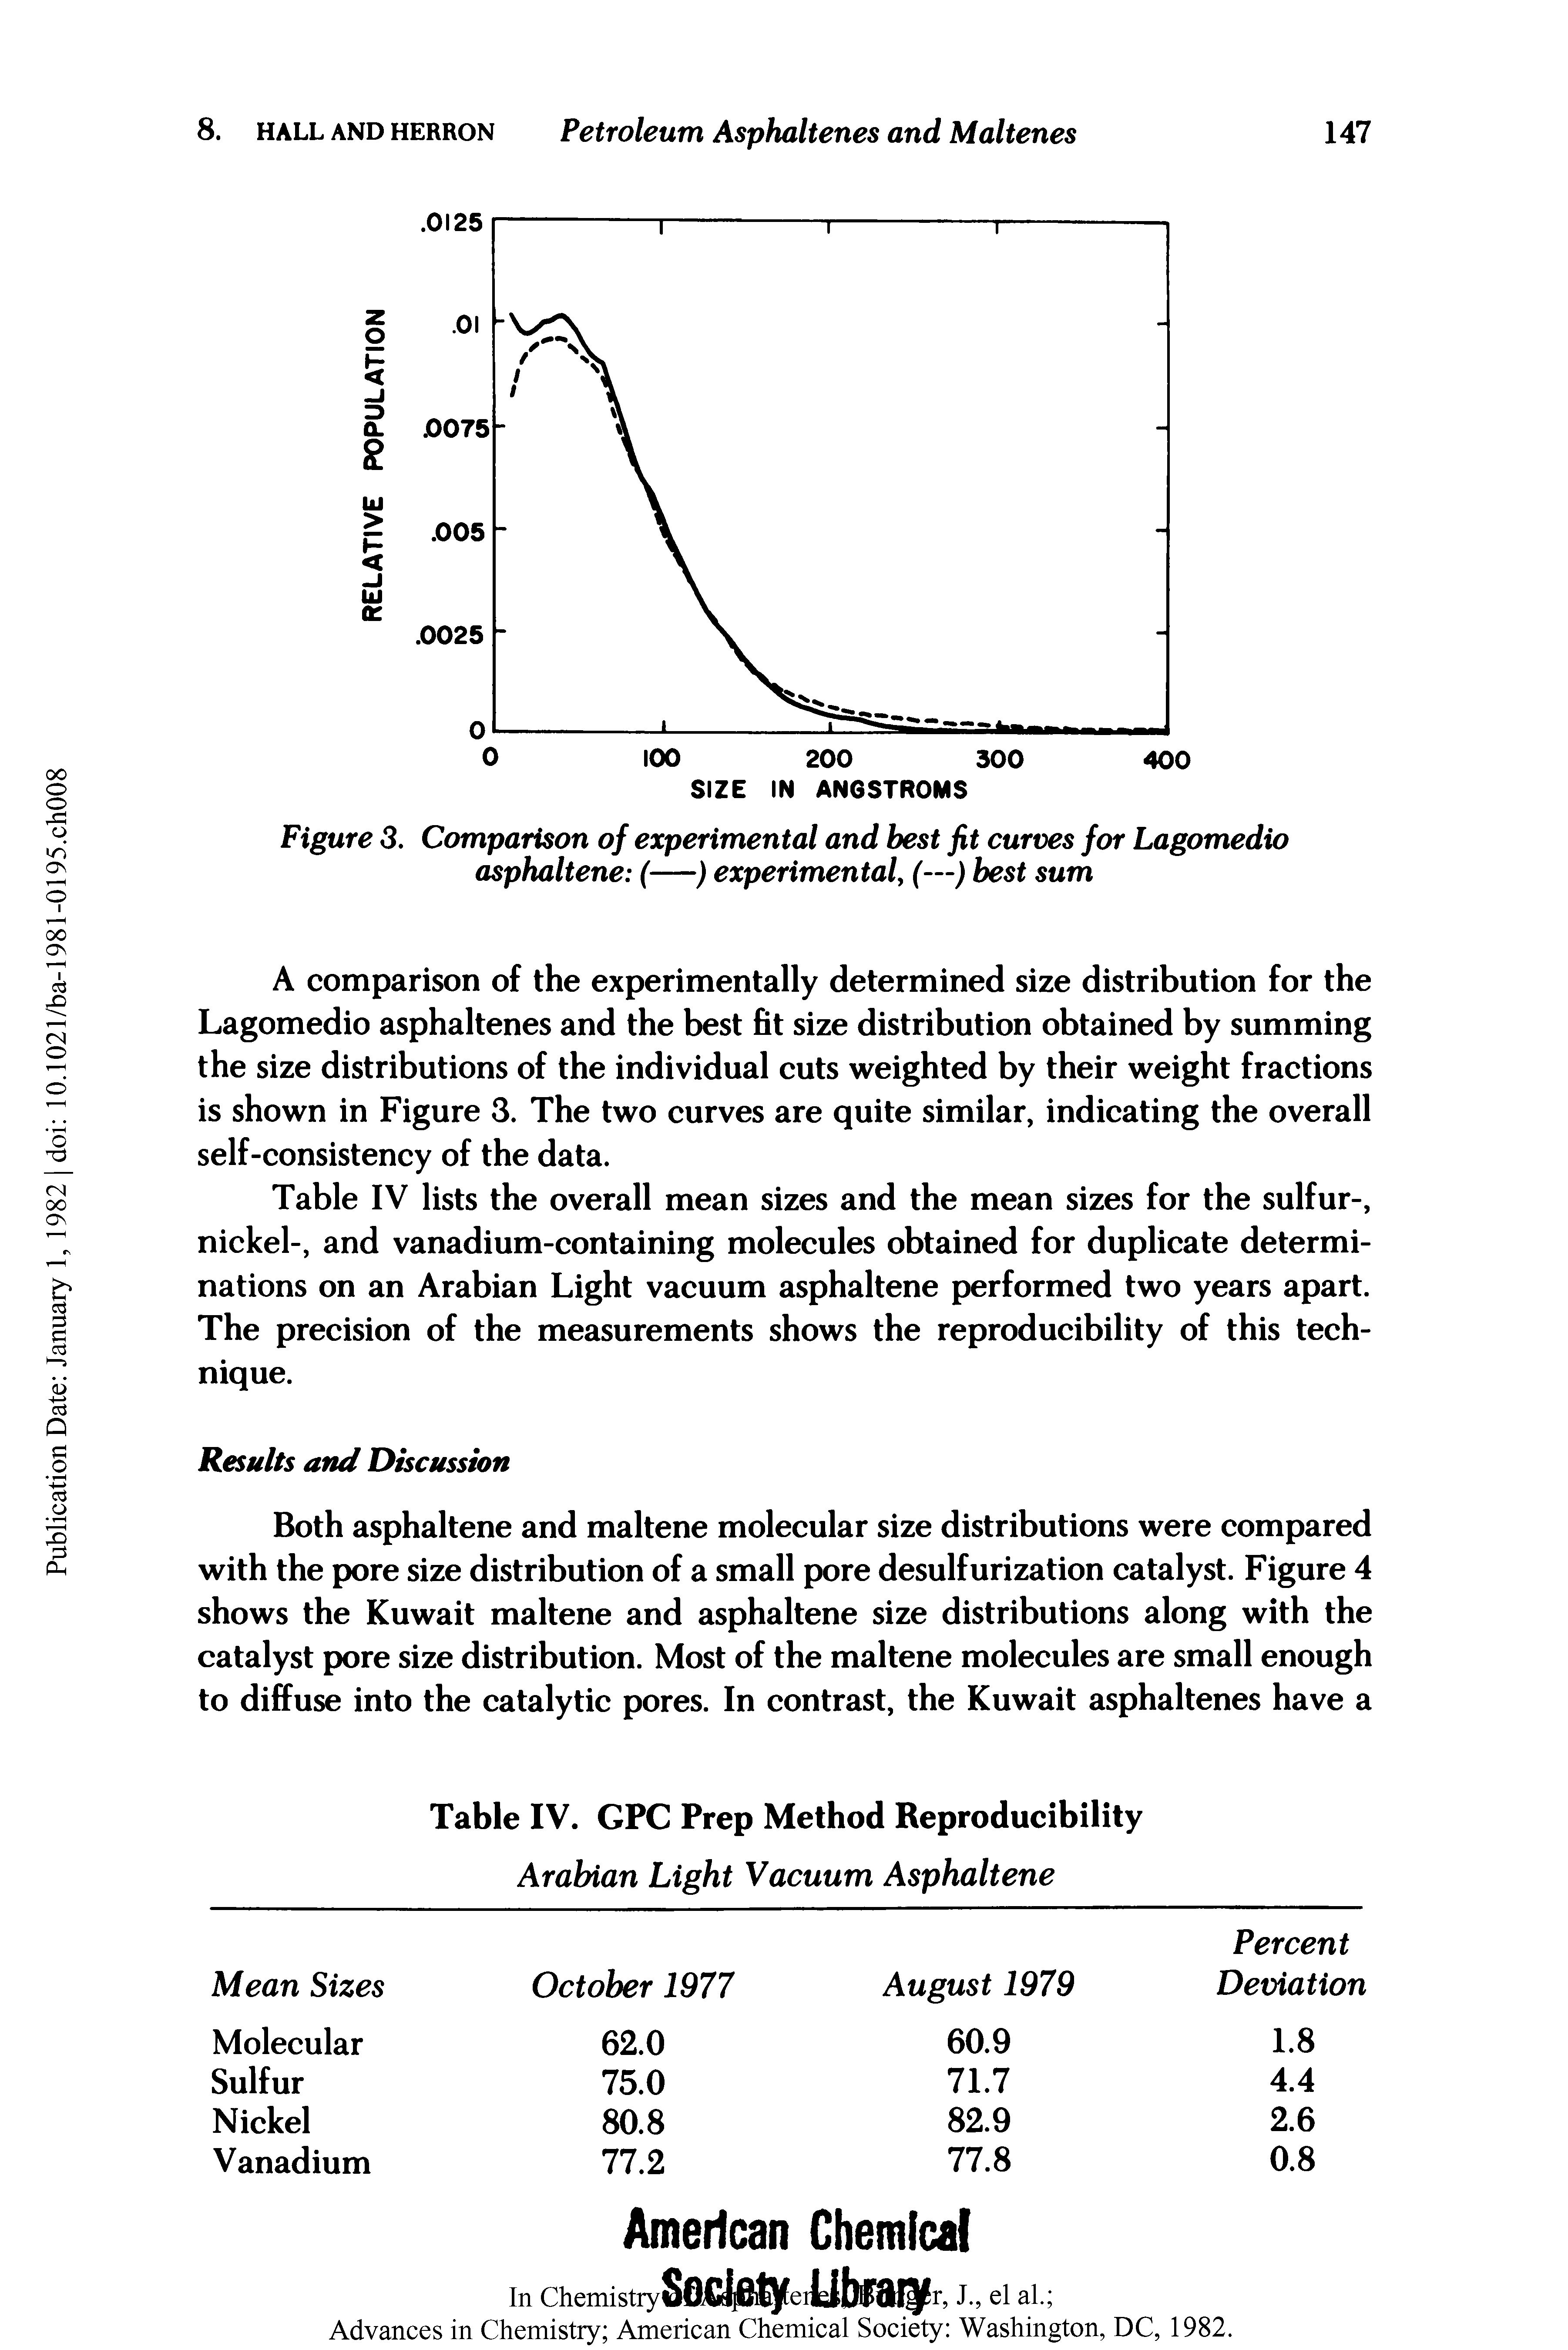 Table IV lists the overall mean sizes and the mean sizes for the sulfur-, nickel-, and vanadium-containing molecules obtained for duplicate determinations on an Arabian Light vacuum asphaltene performed two years apart. The precision of the measurements shows the reproducibility of this technique.